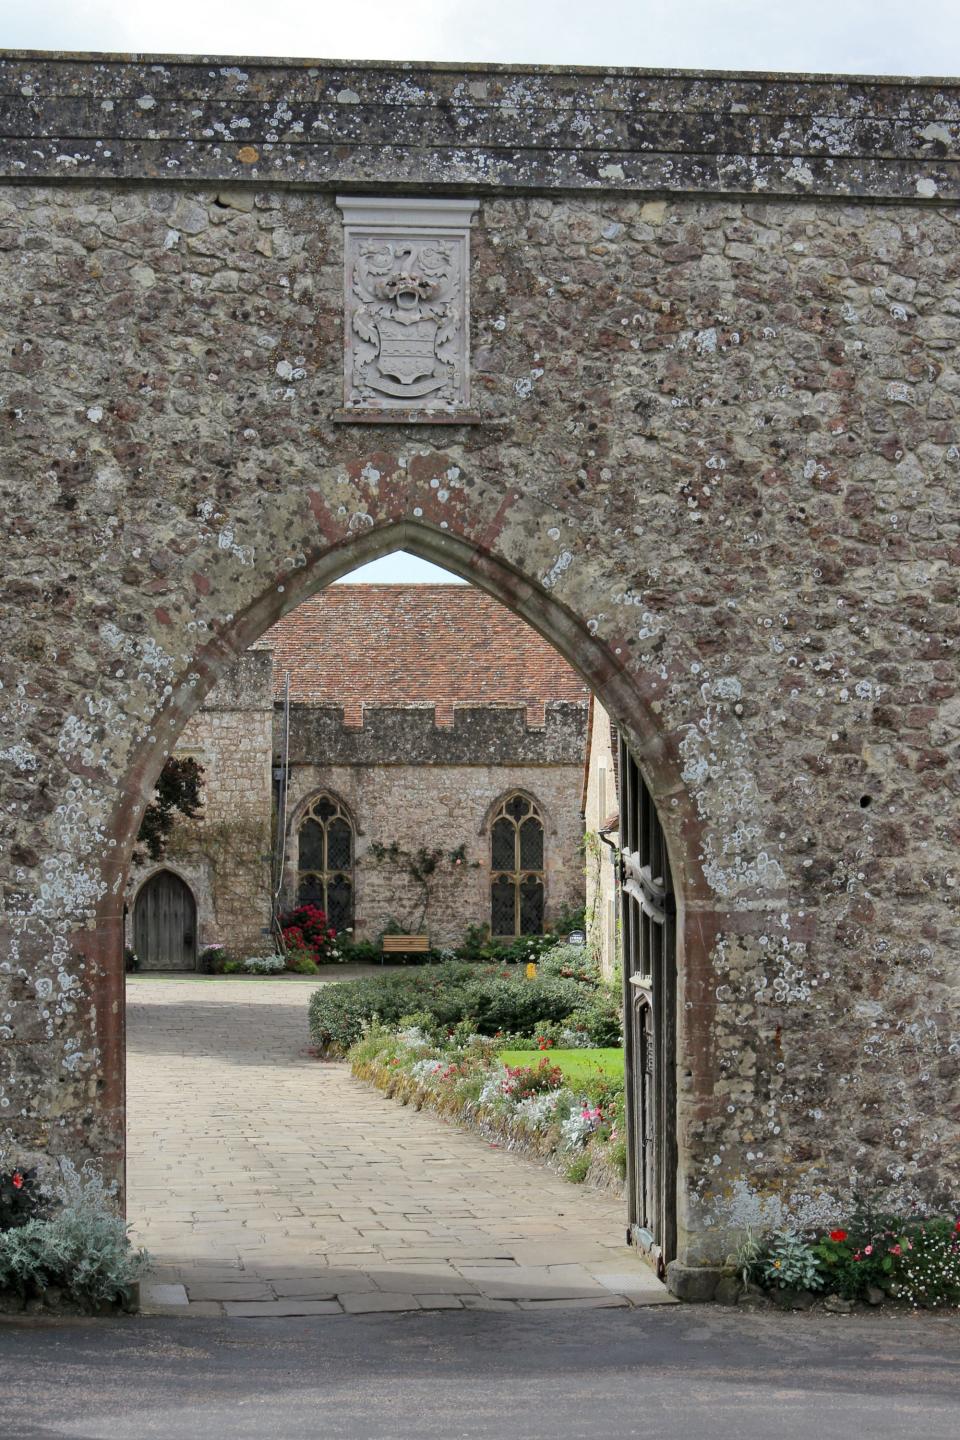 An walled entrance into Lympne Castle, with an open black iron gate.